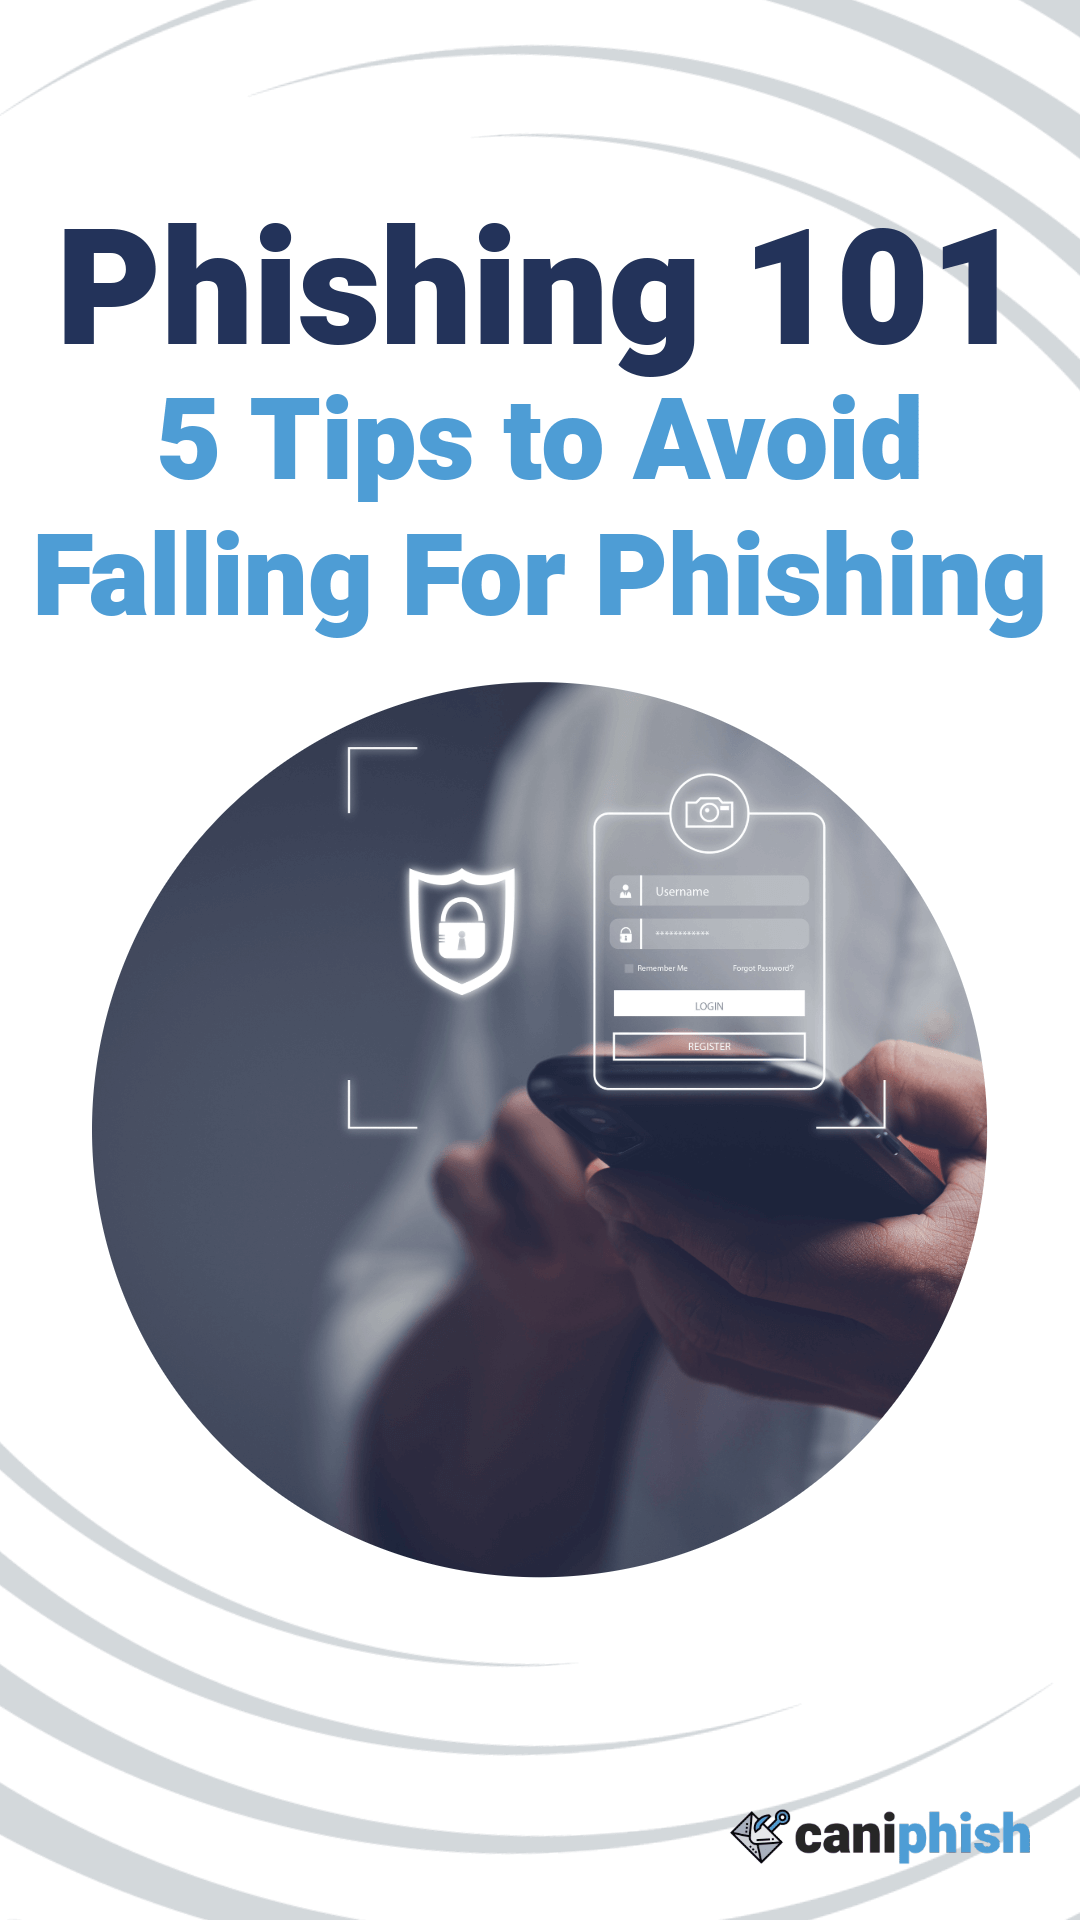 Guide depicting the title page of a guide on how to avoid falling for phishing attacks.